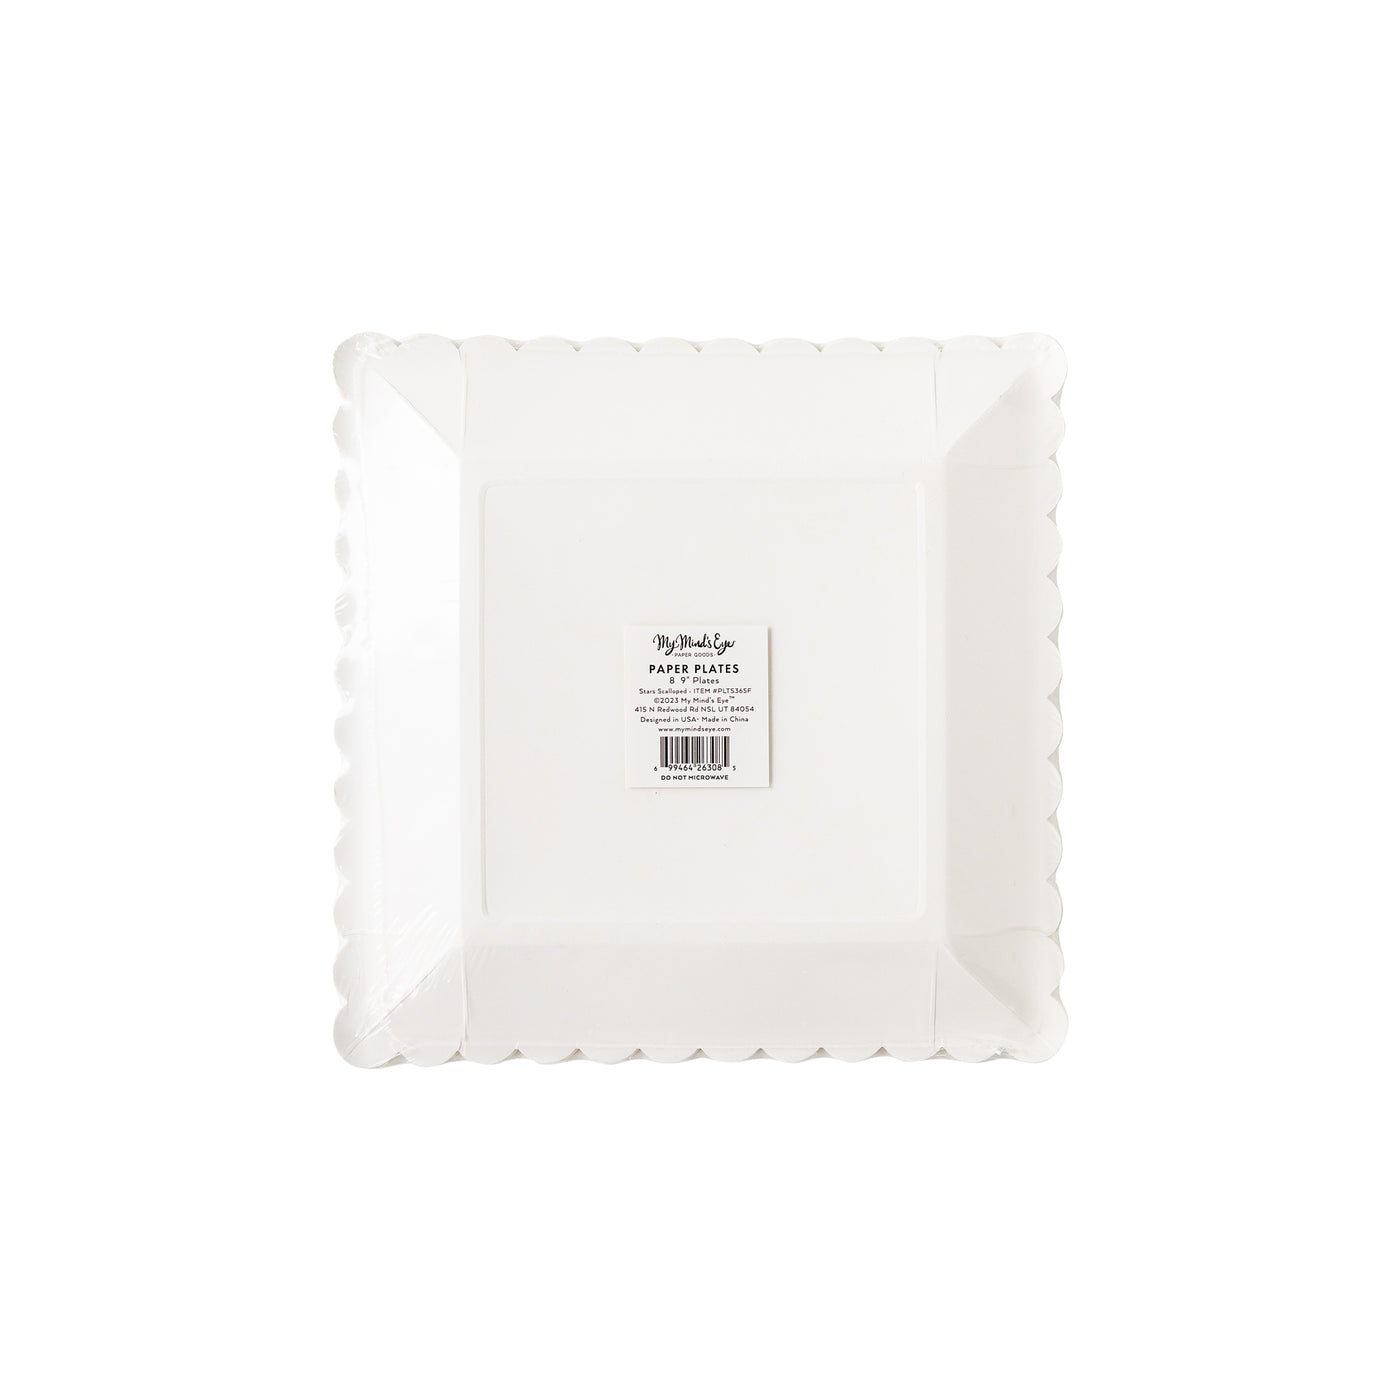 PLTS365F-MME - Square Star Scallop Paper Plate